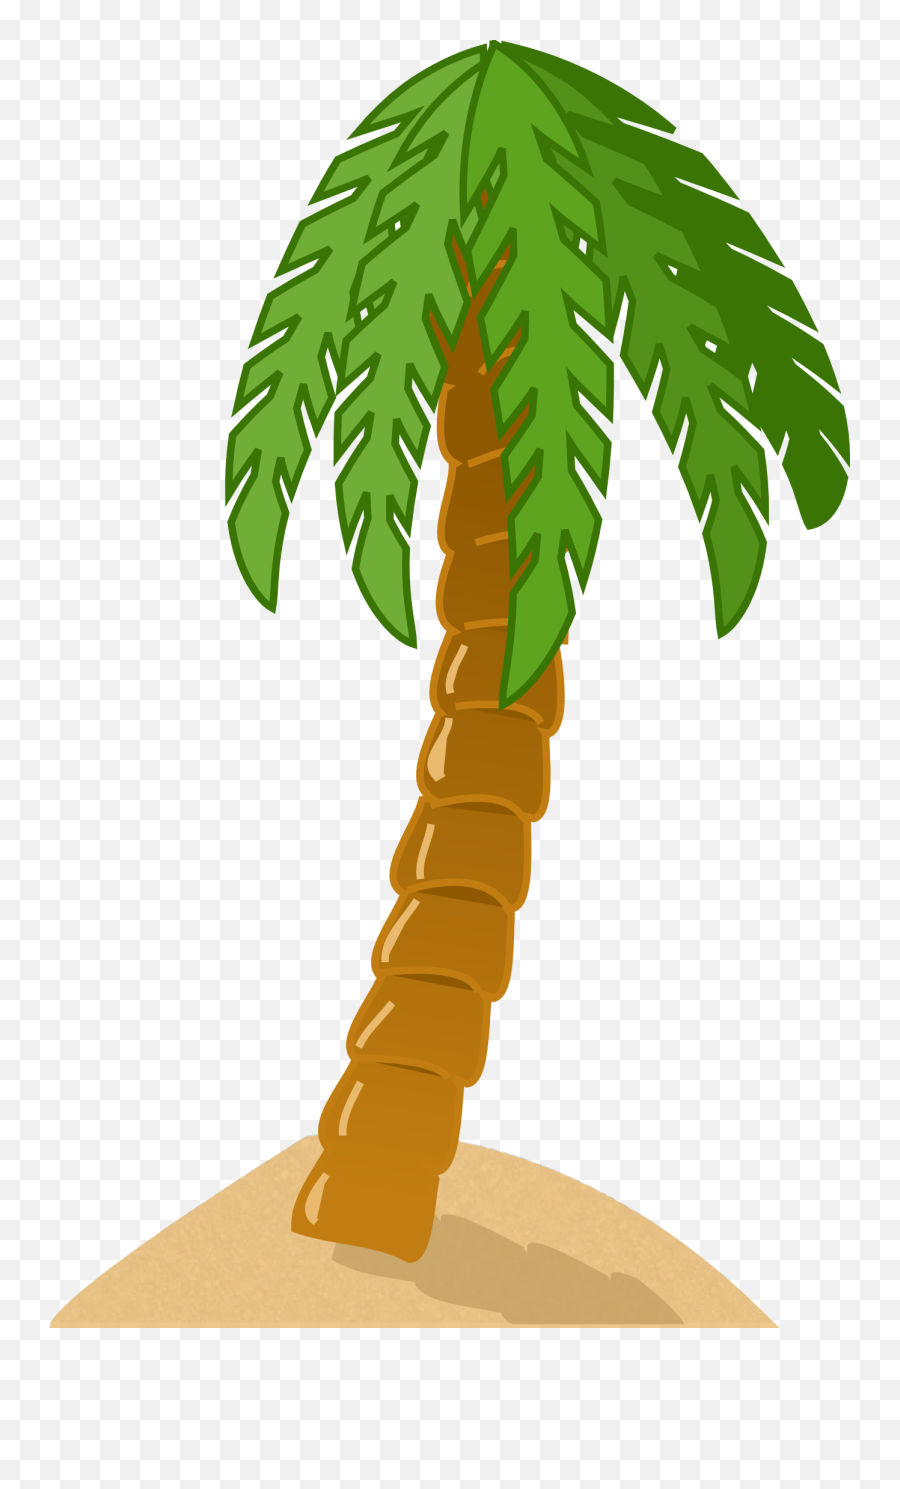 Free Pictures Leaves - 3591 Images Found Palm Tree Clipart Png,Palm Tree Leaves Png